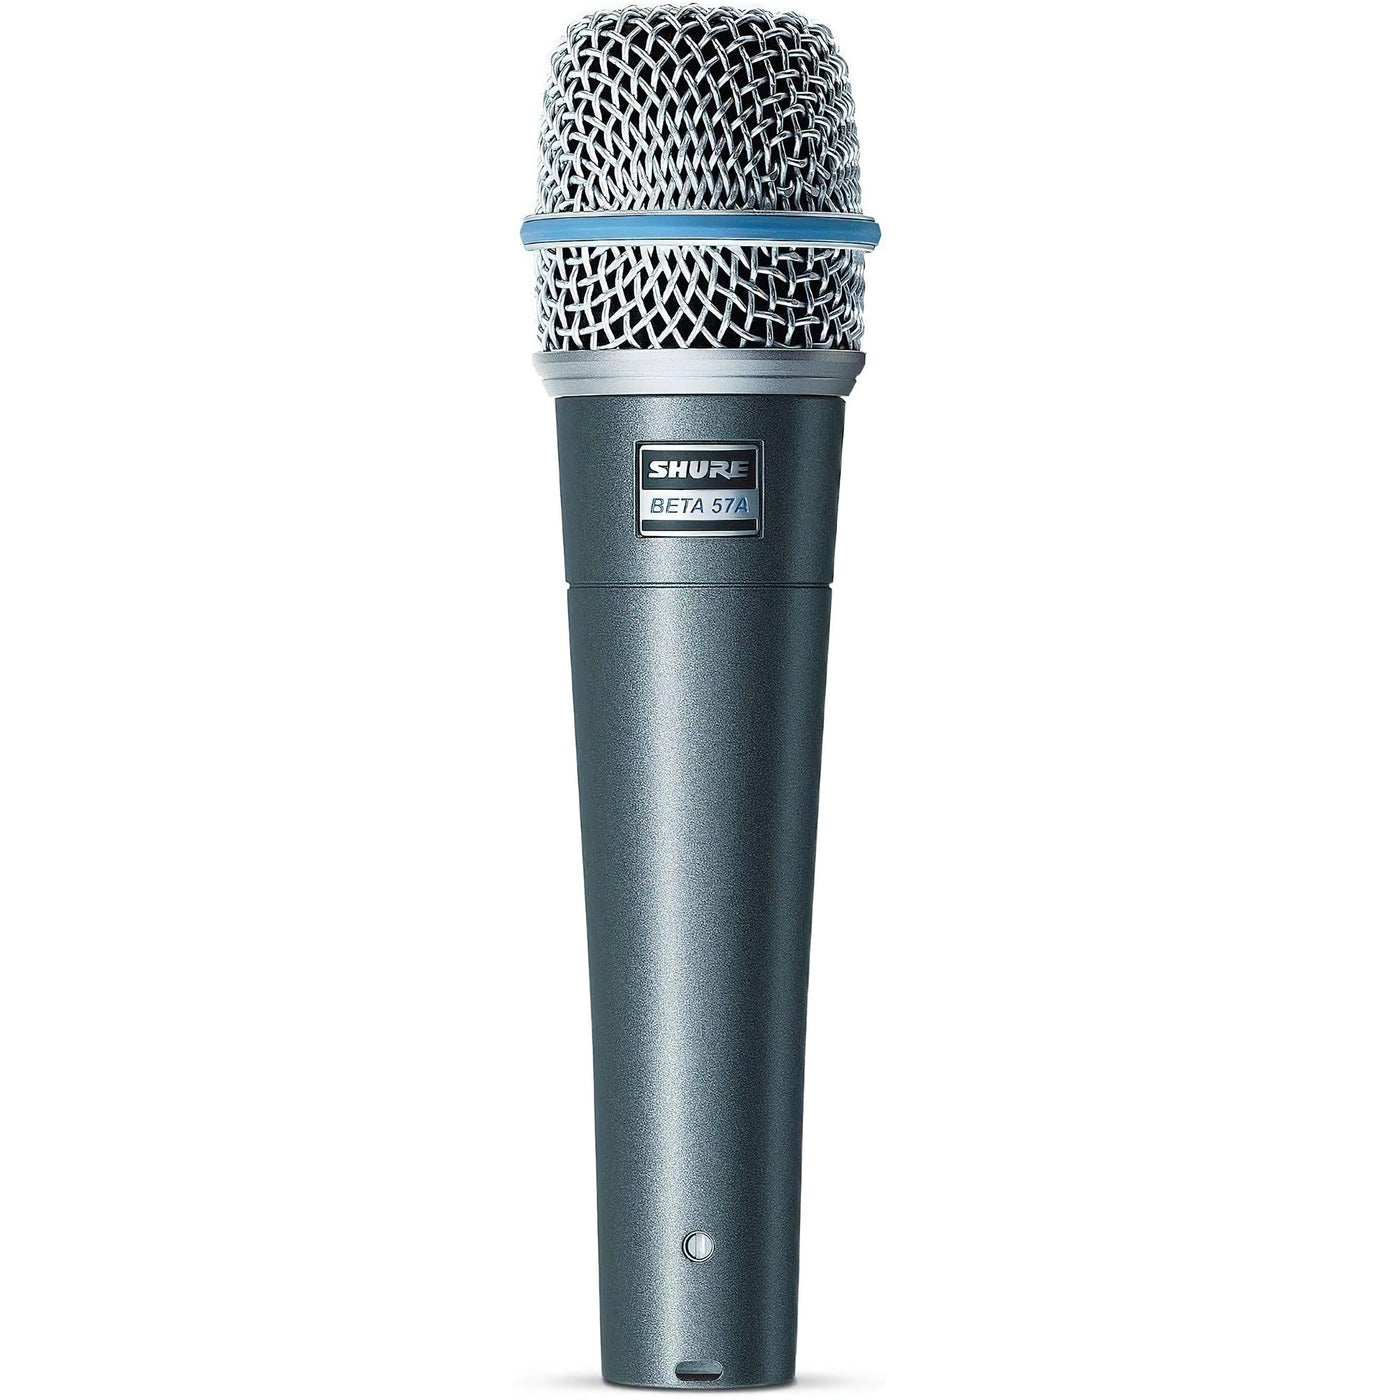 Shure Instrument Microphone, Supercardioid Dynamic Mic for Vocal and Instrumental Applications with High Output Neodymium Element, Durable Steel Mesh Grille and Shock Mount (BETA 57A)